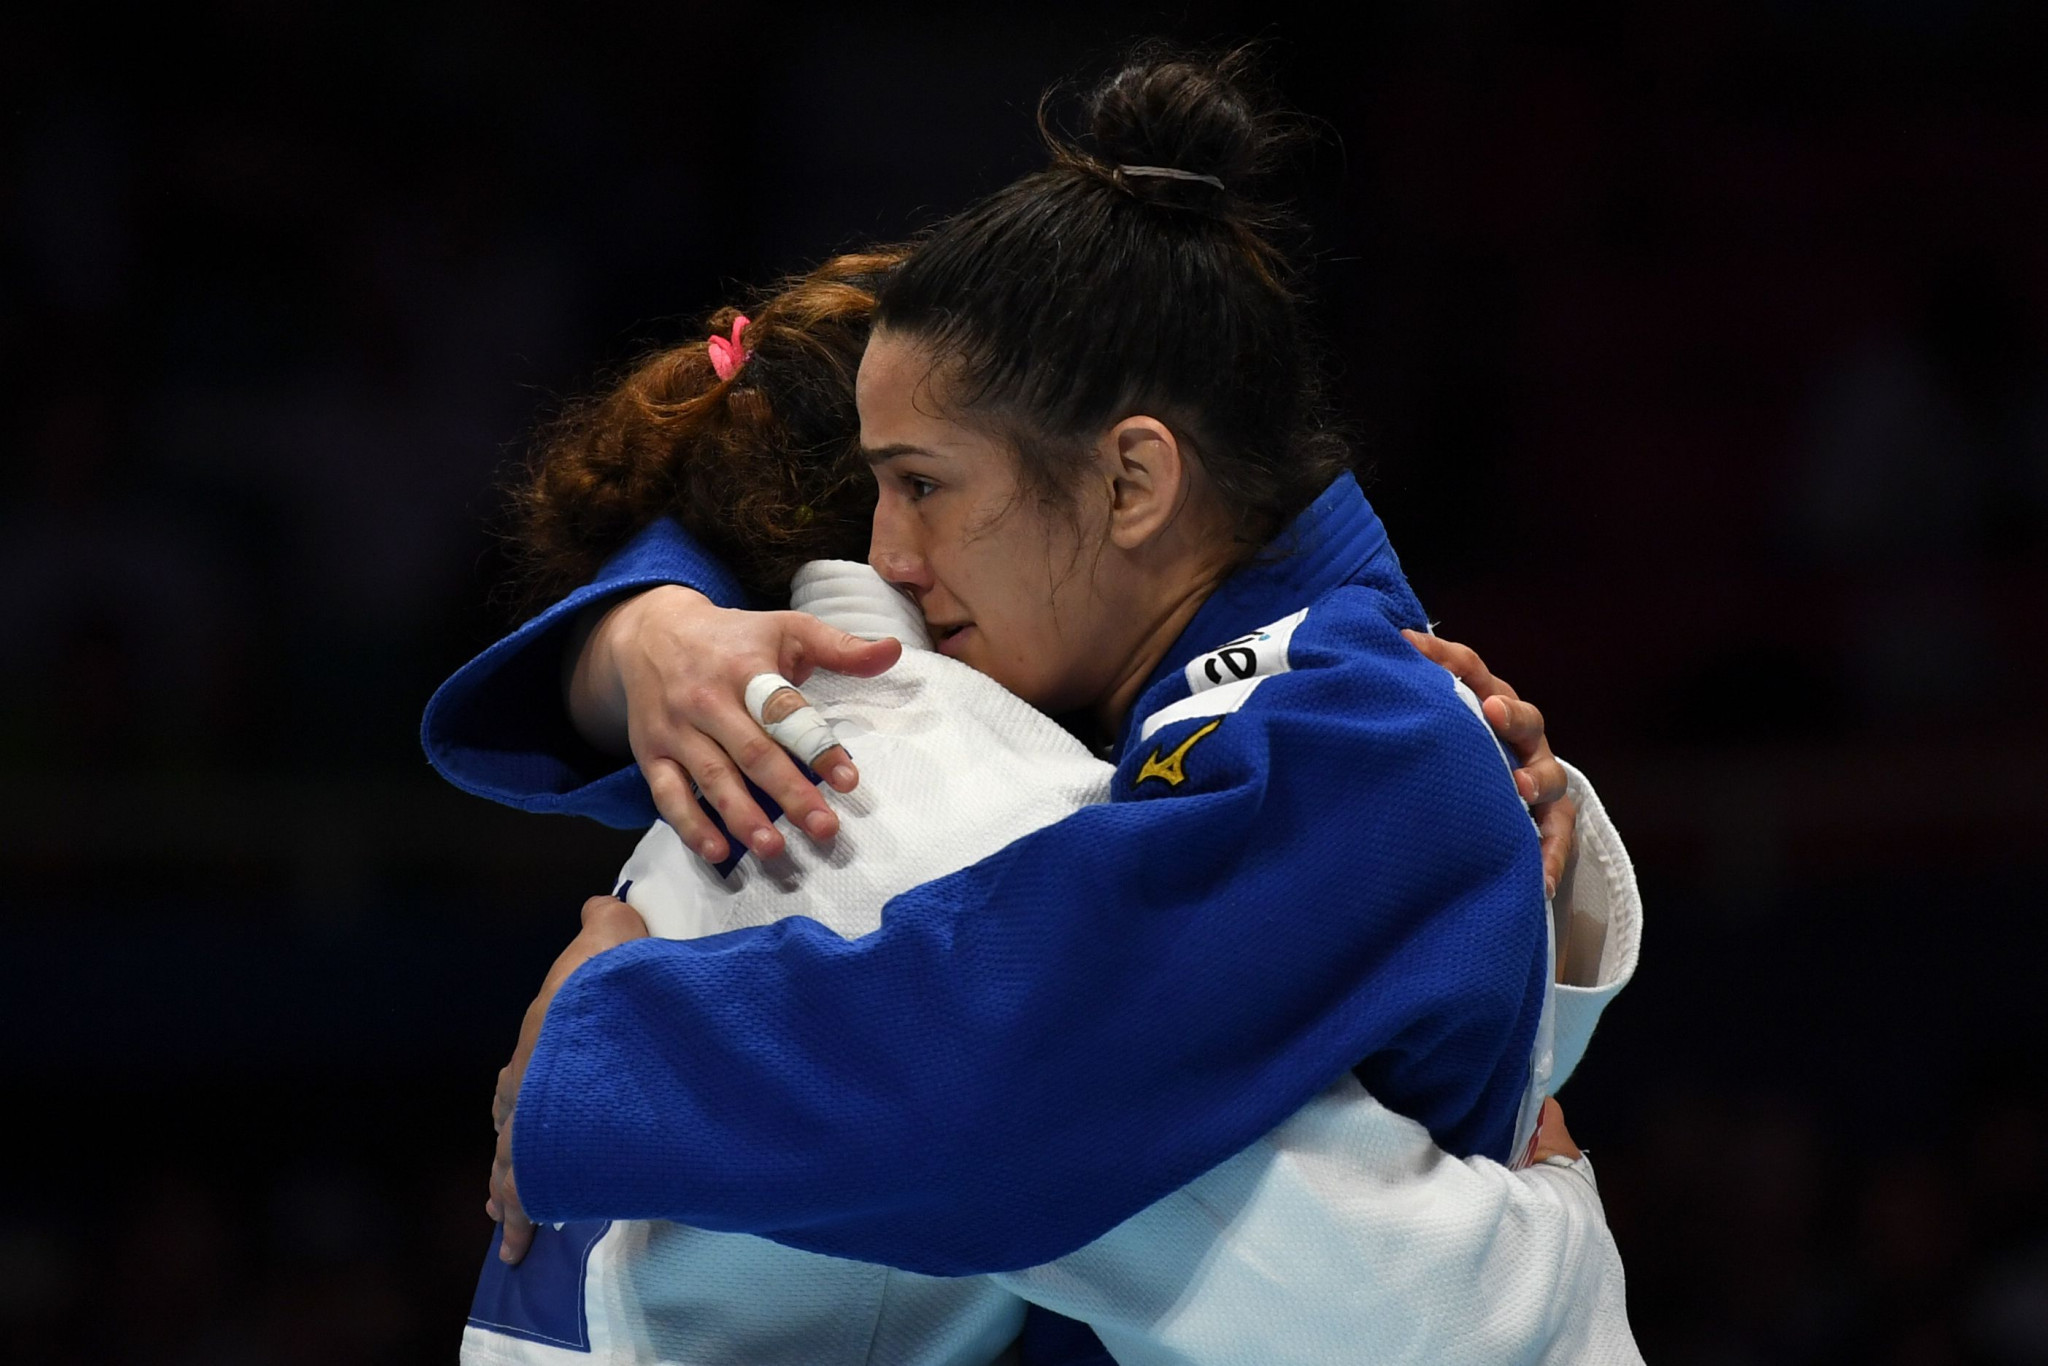 Mayra Aguiar of Brazil, in blue, hugs Patricia Sampaio of Portugal after winning bronze ©Getty Images